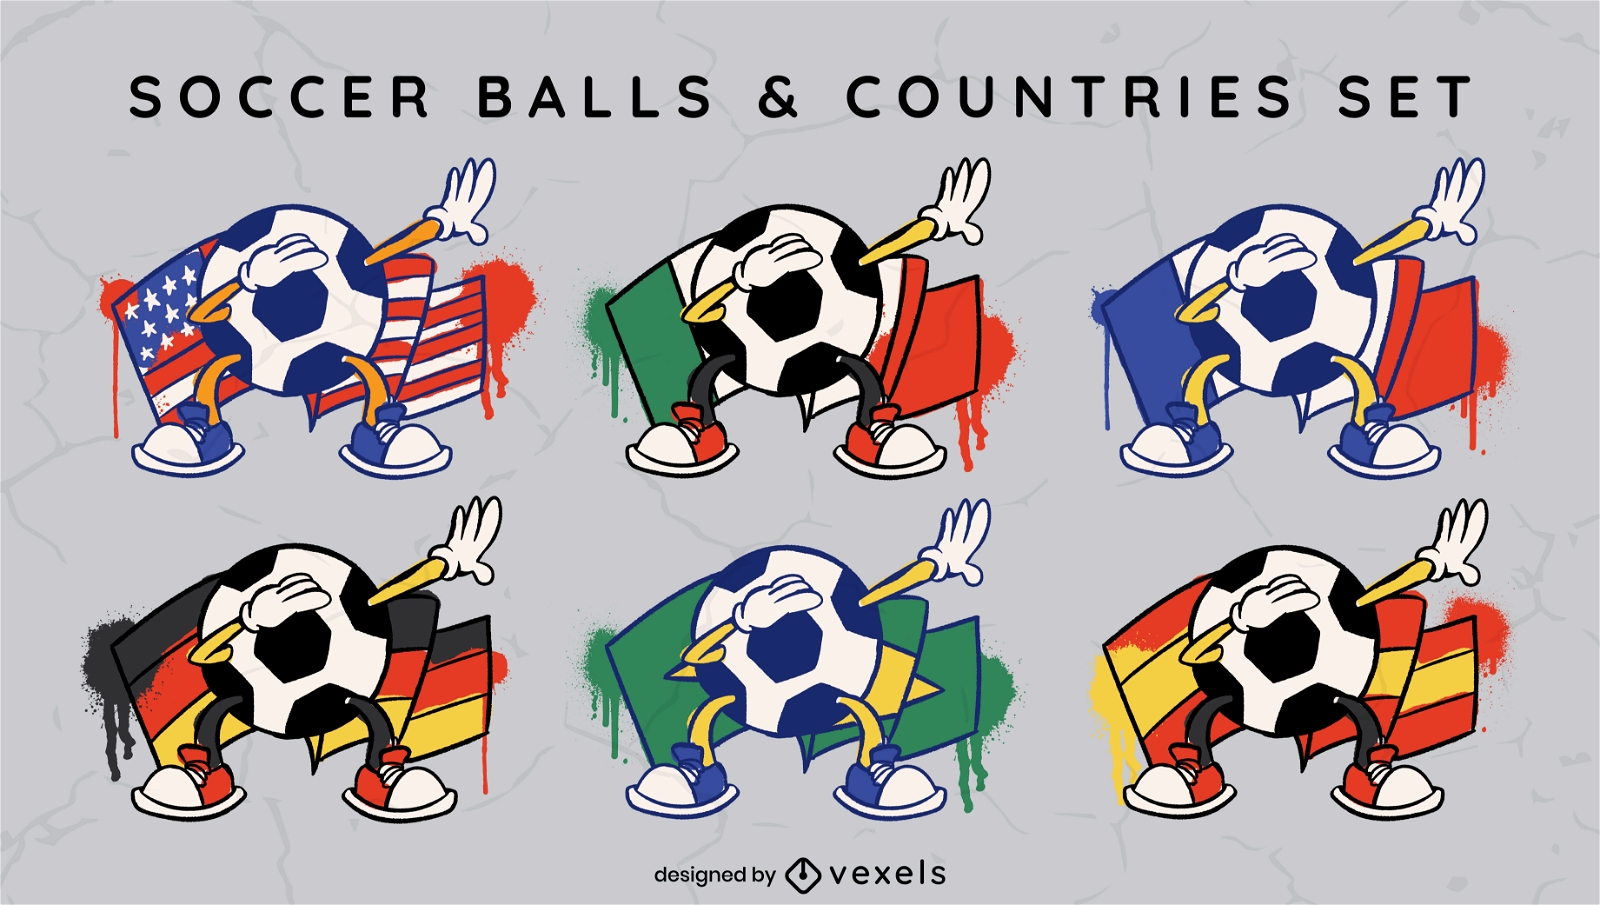 Soccer balls and countries set